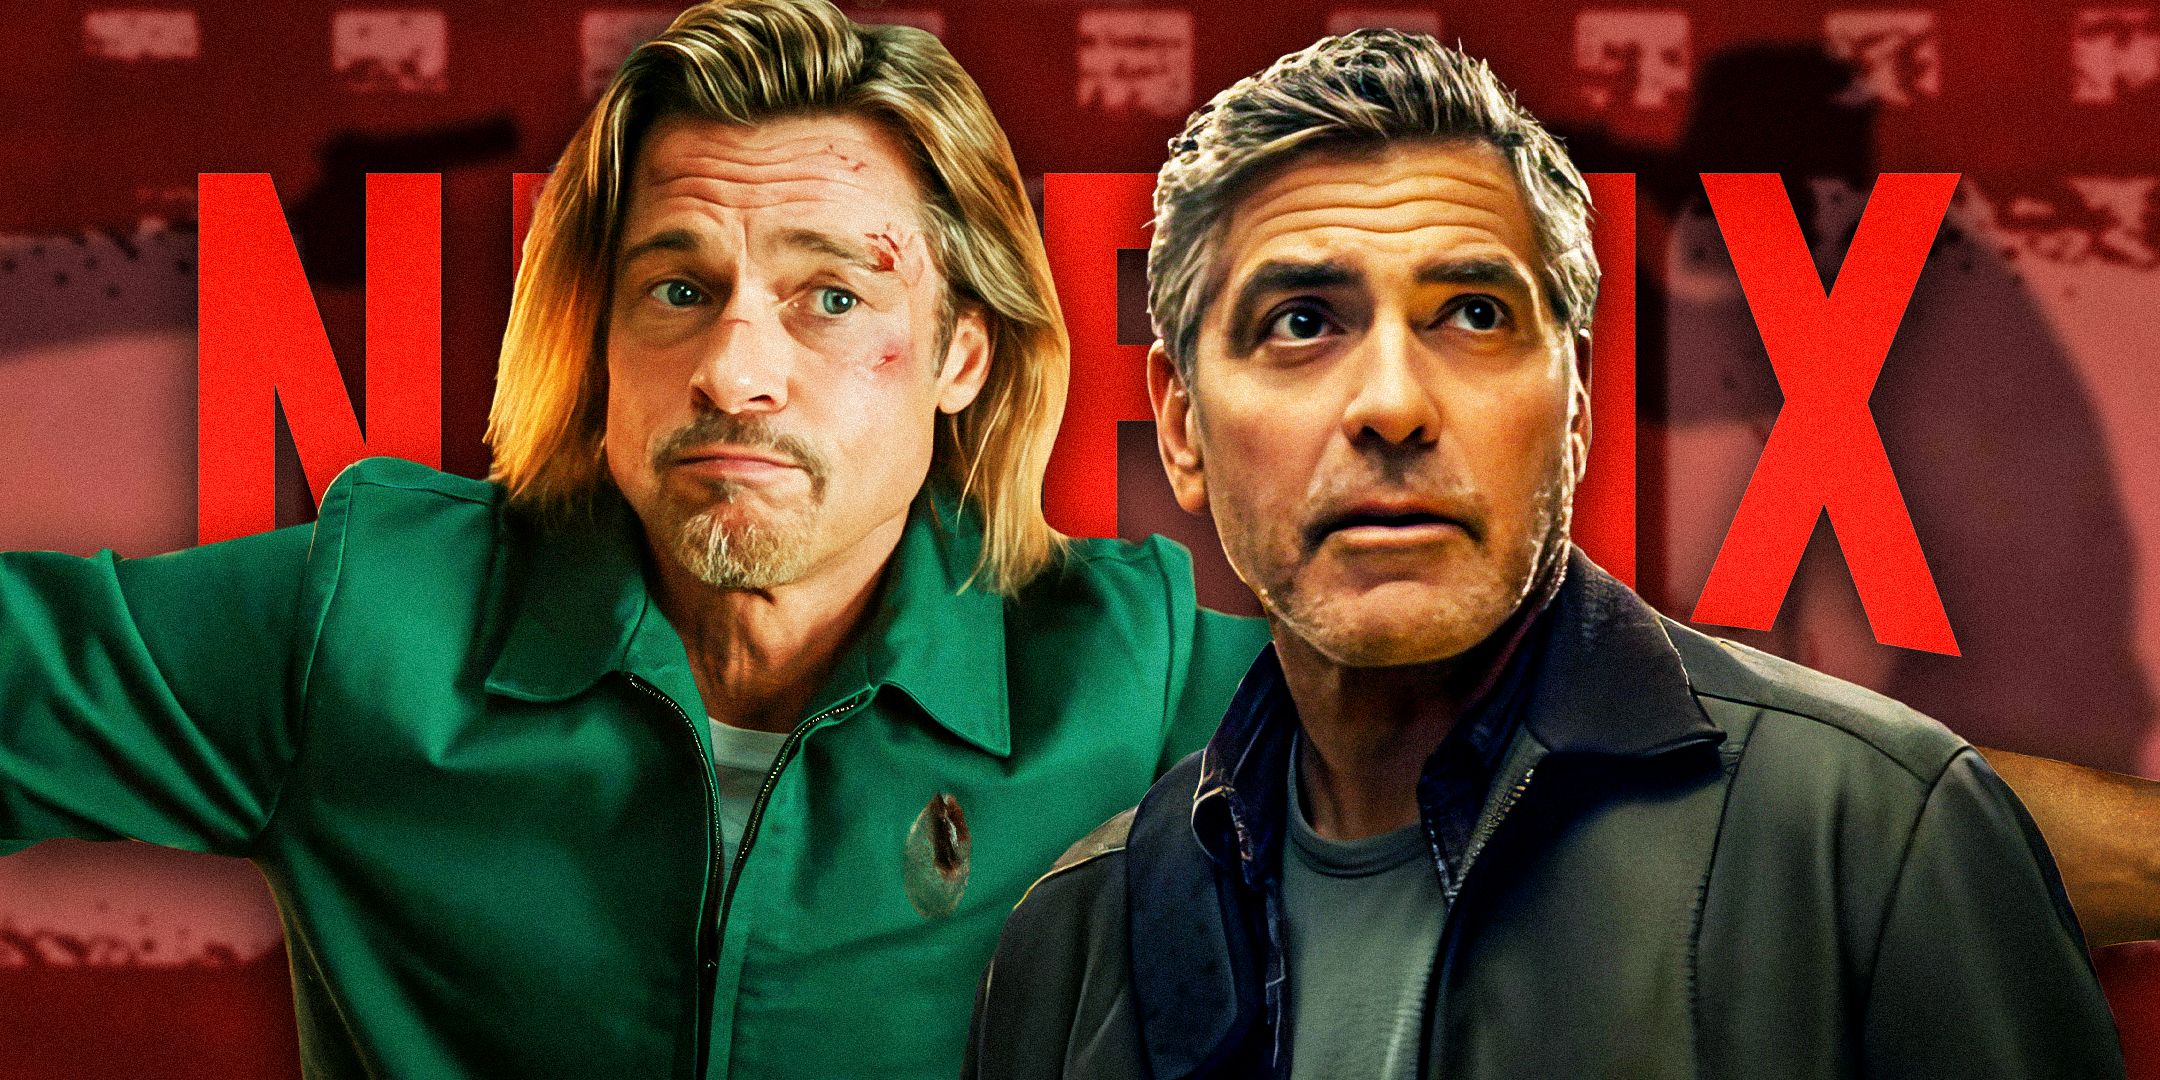 (Brad-Pitt-as-Ladybug)-from-Bullet-Train-and-(----George-Clooney-as-Frank-Walker)-from-Tomorrowland